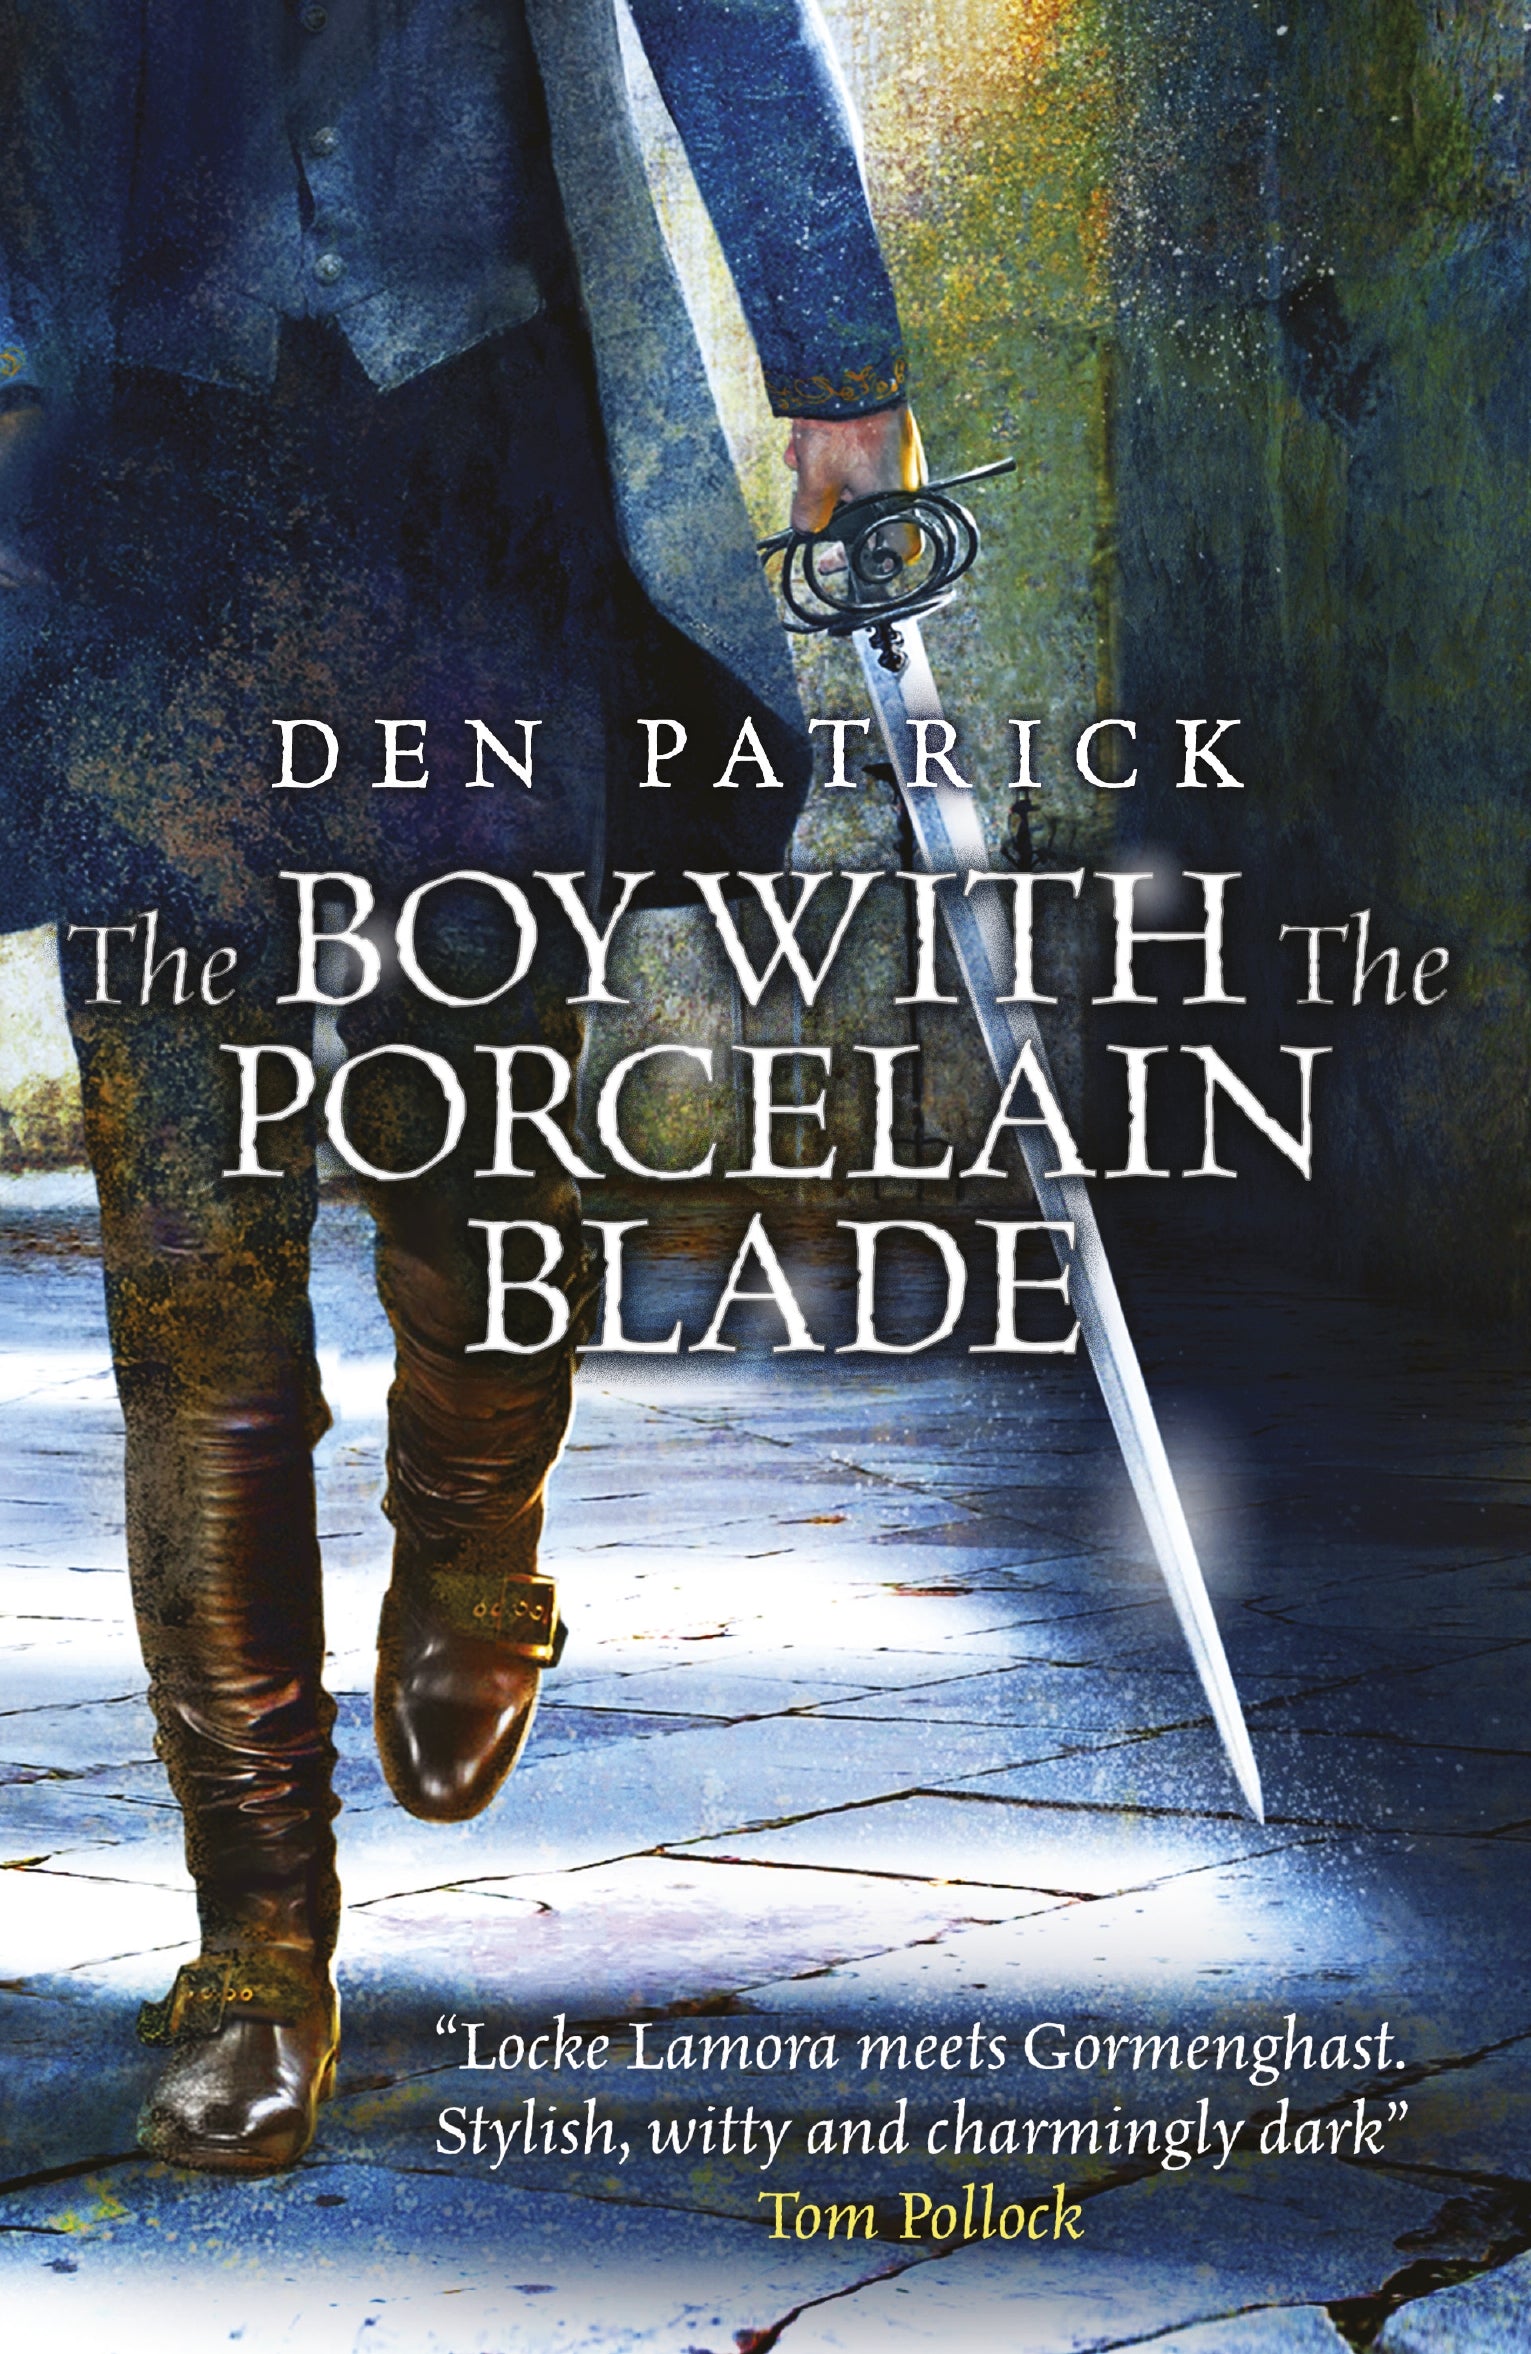 The Boy with the Porcelain Blade by Den Patrick